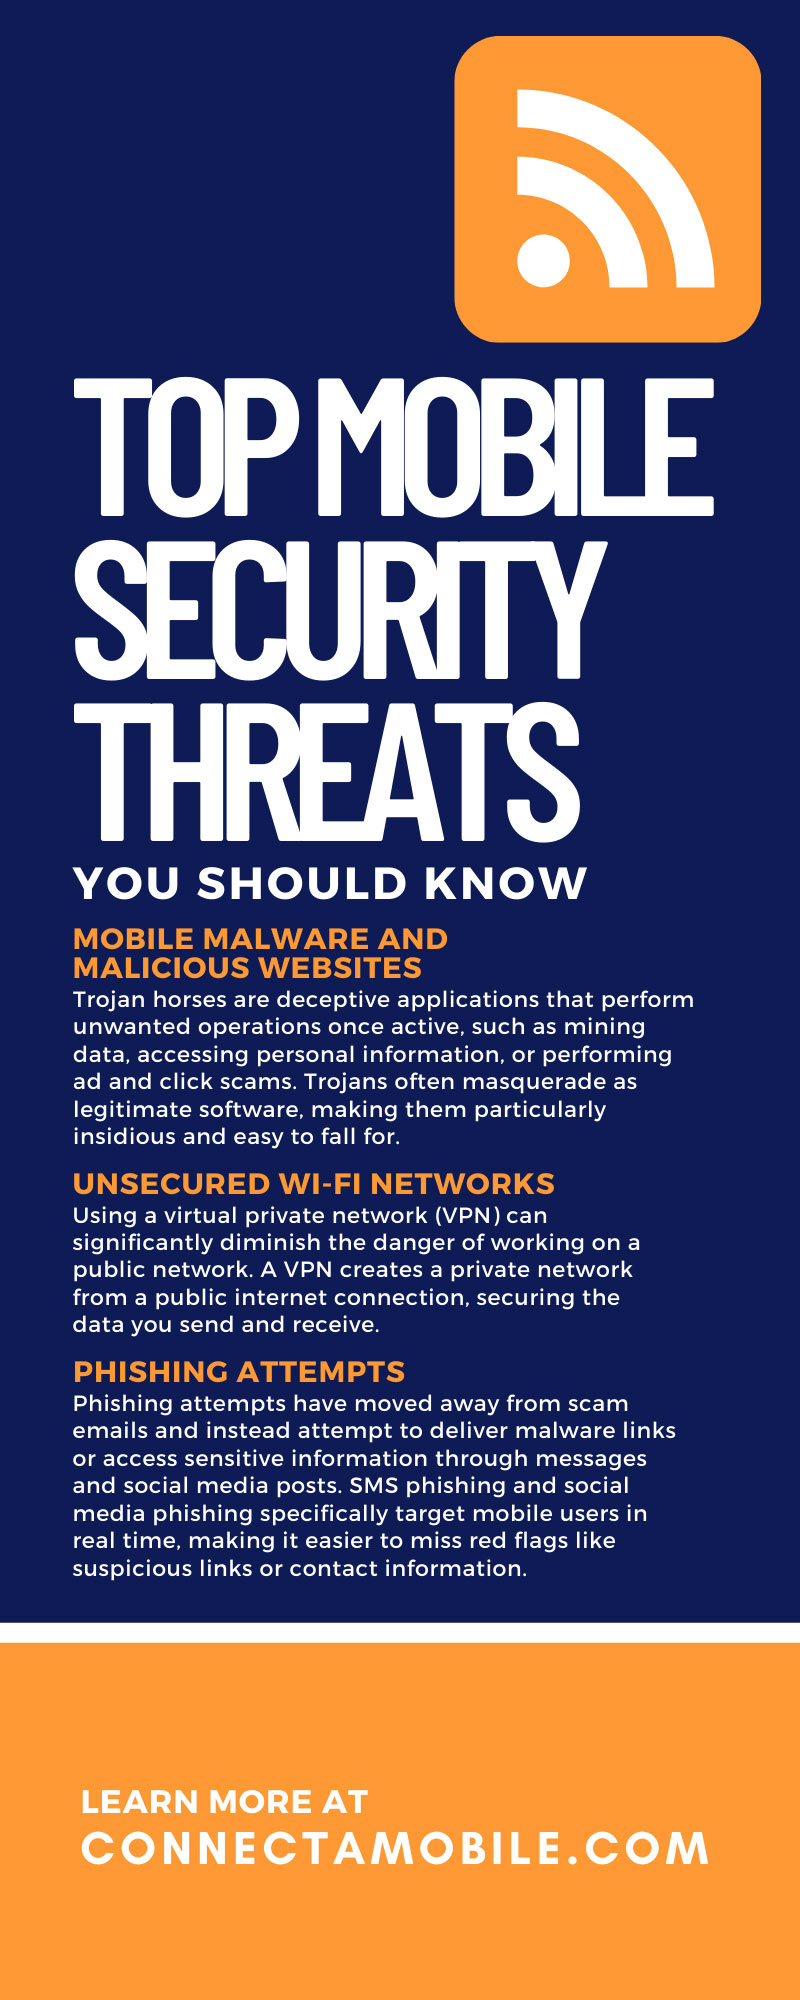 Top Mobile Security Threats You Should Know